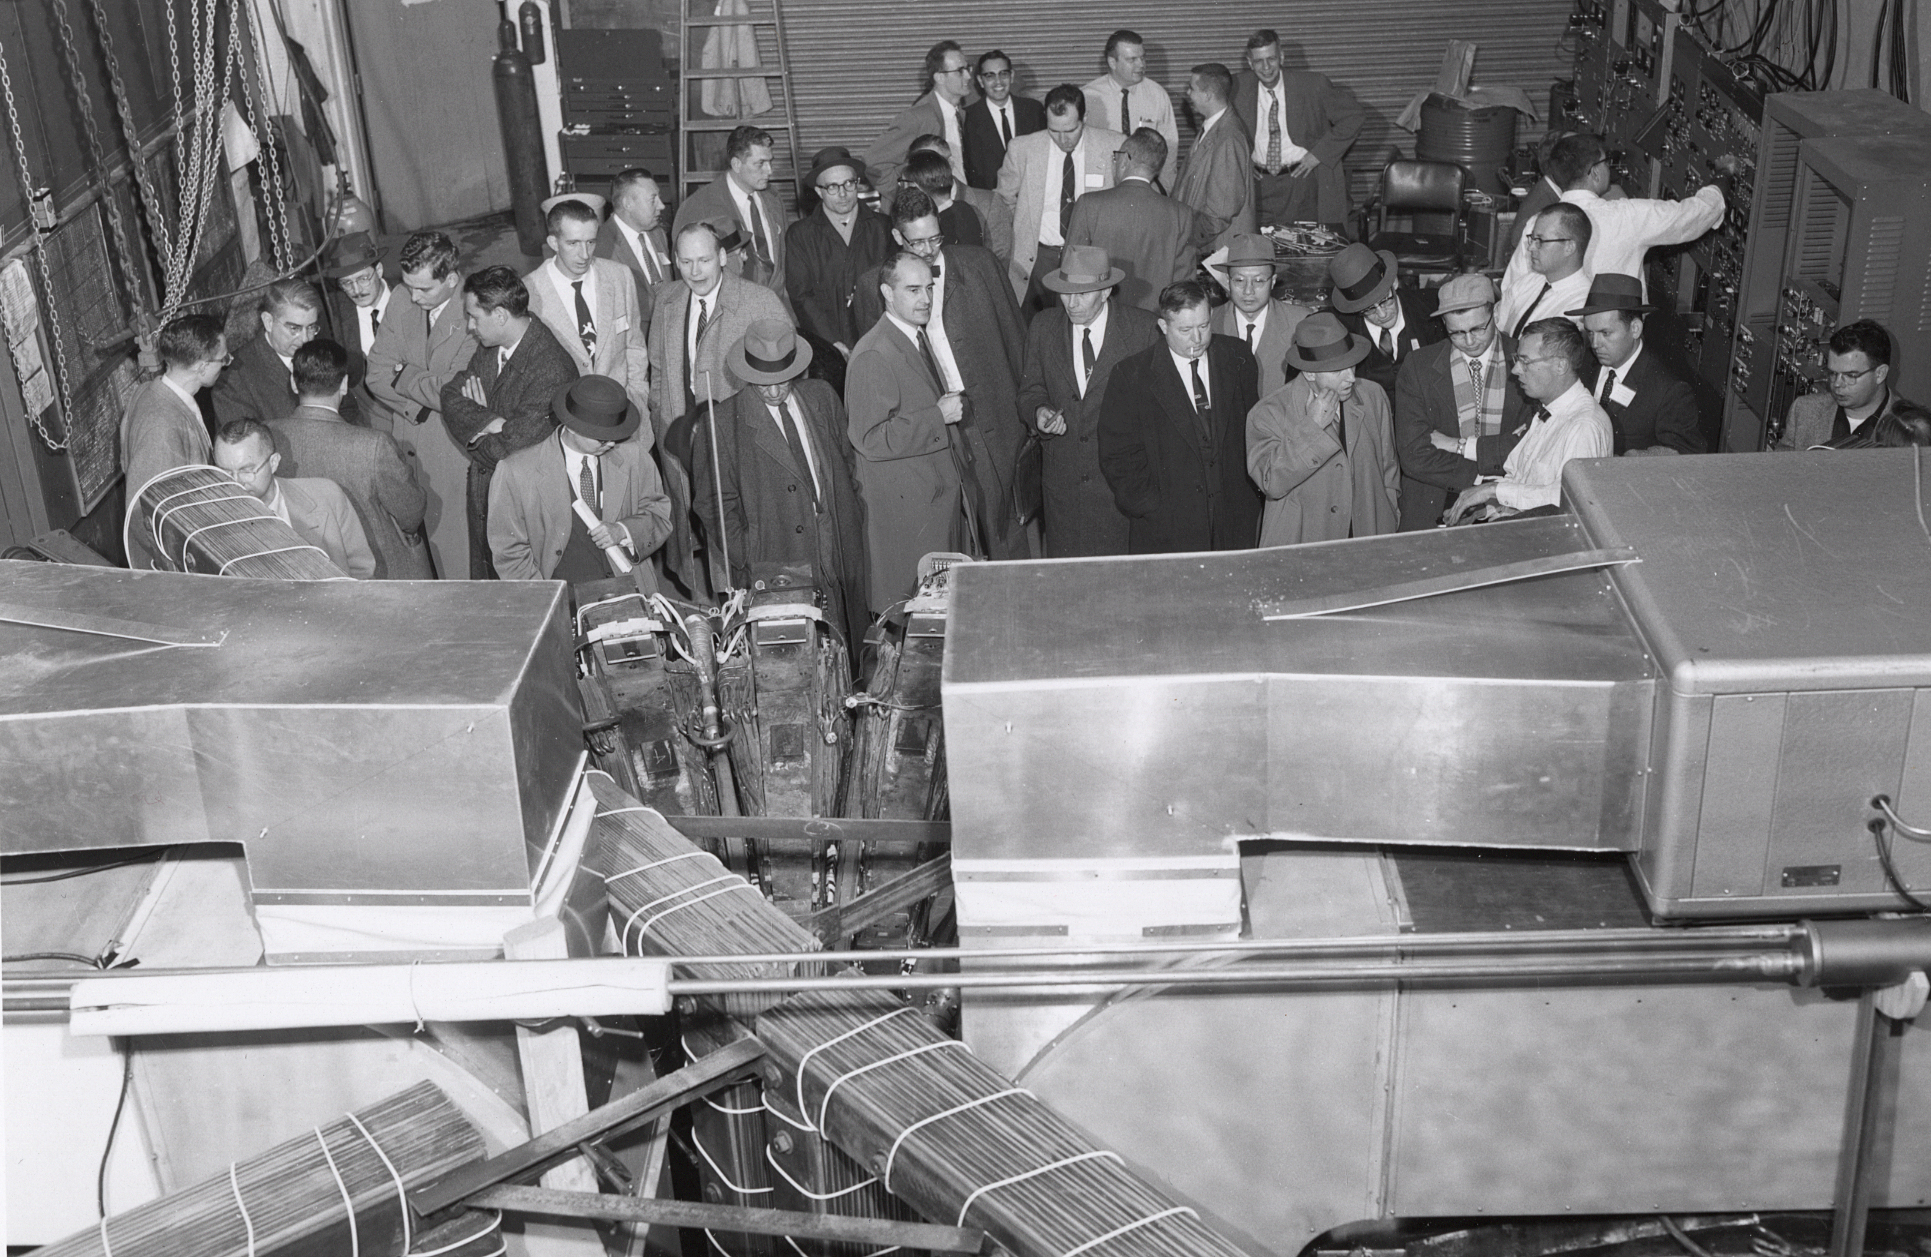   Guests tour Midwestern Universities Research Association (MURA)/Synchrotron site. Photo: University of Wisconsin Madison Archives  